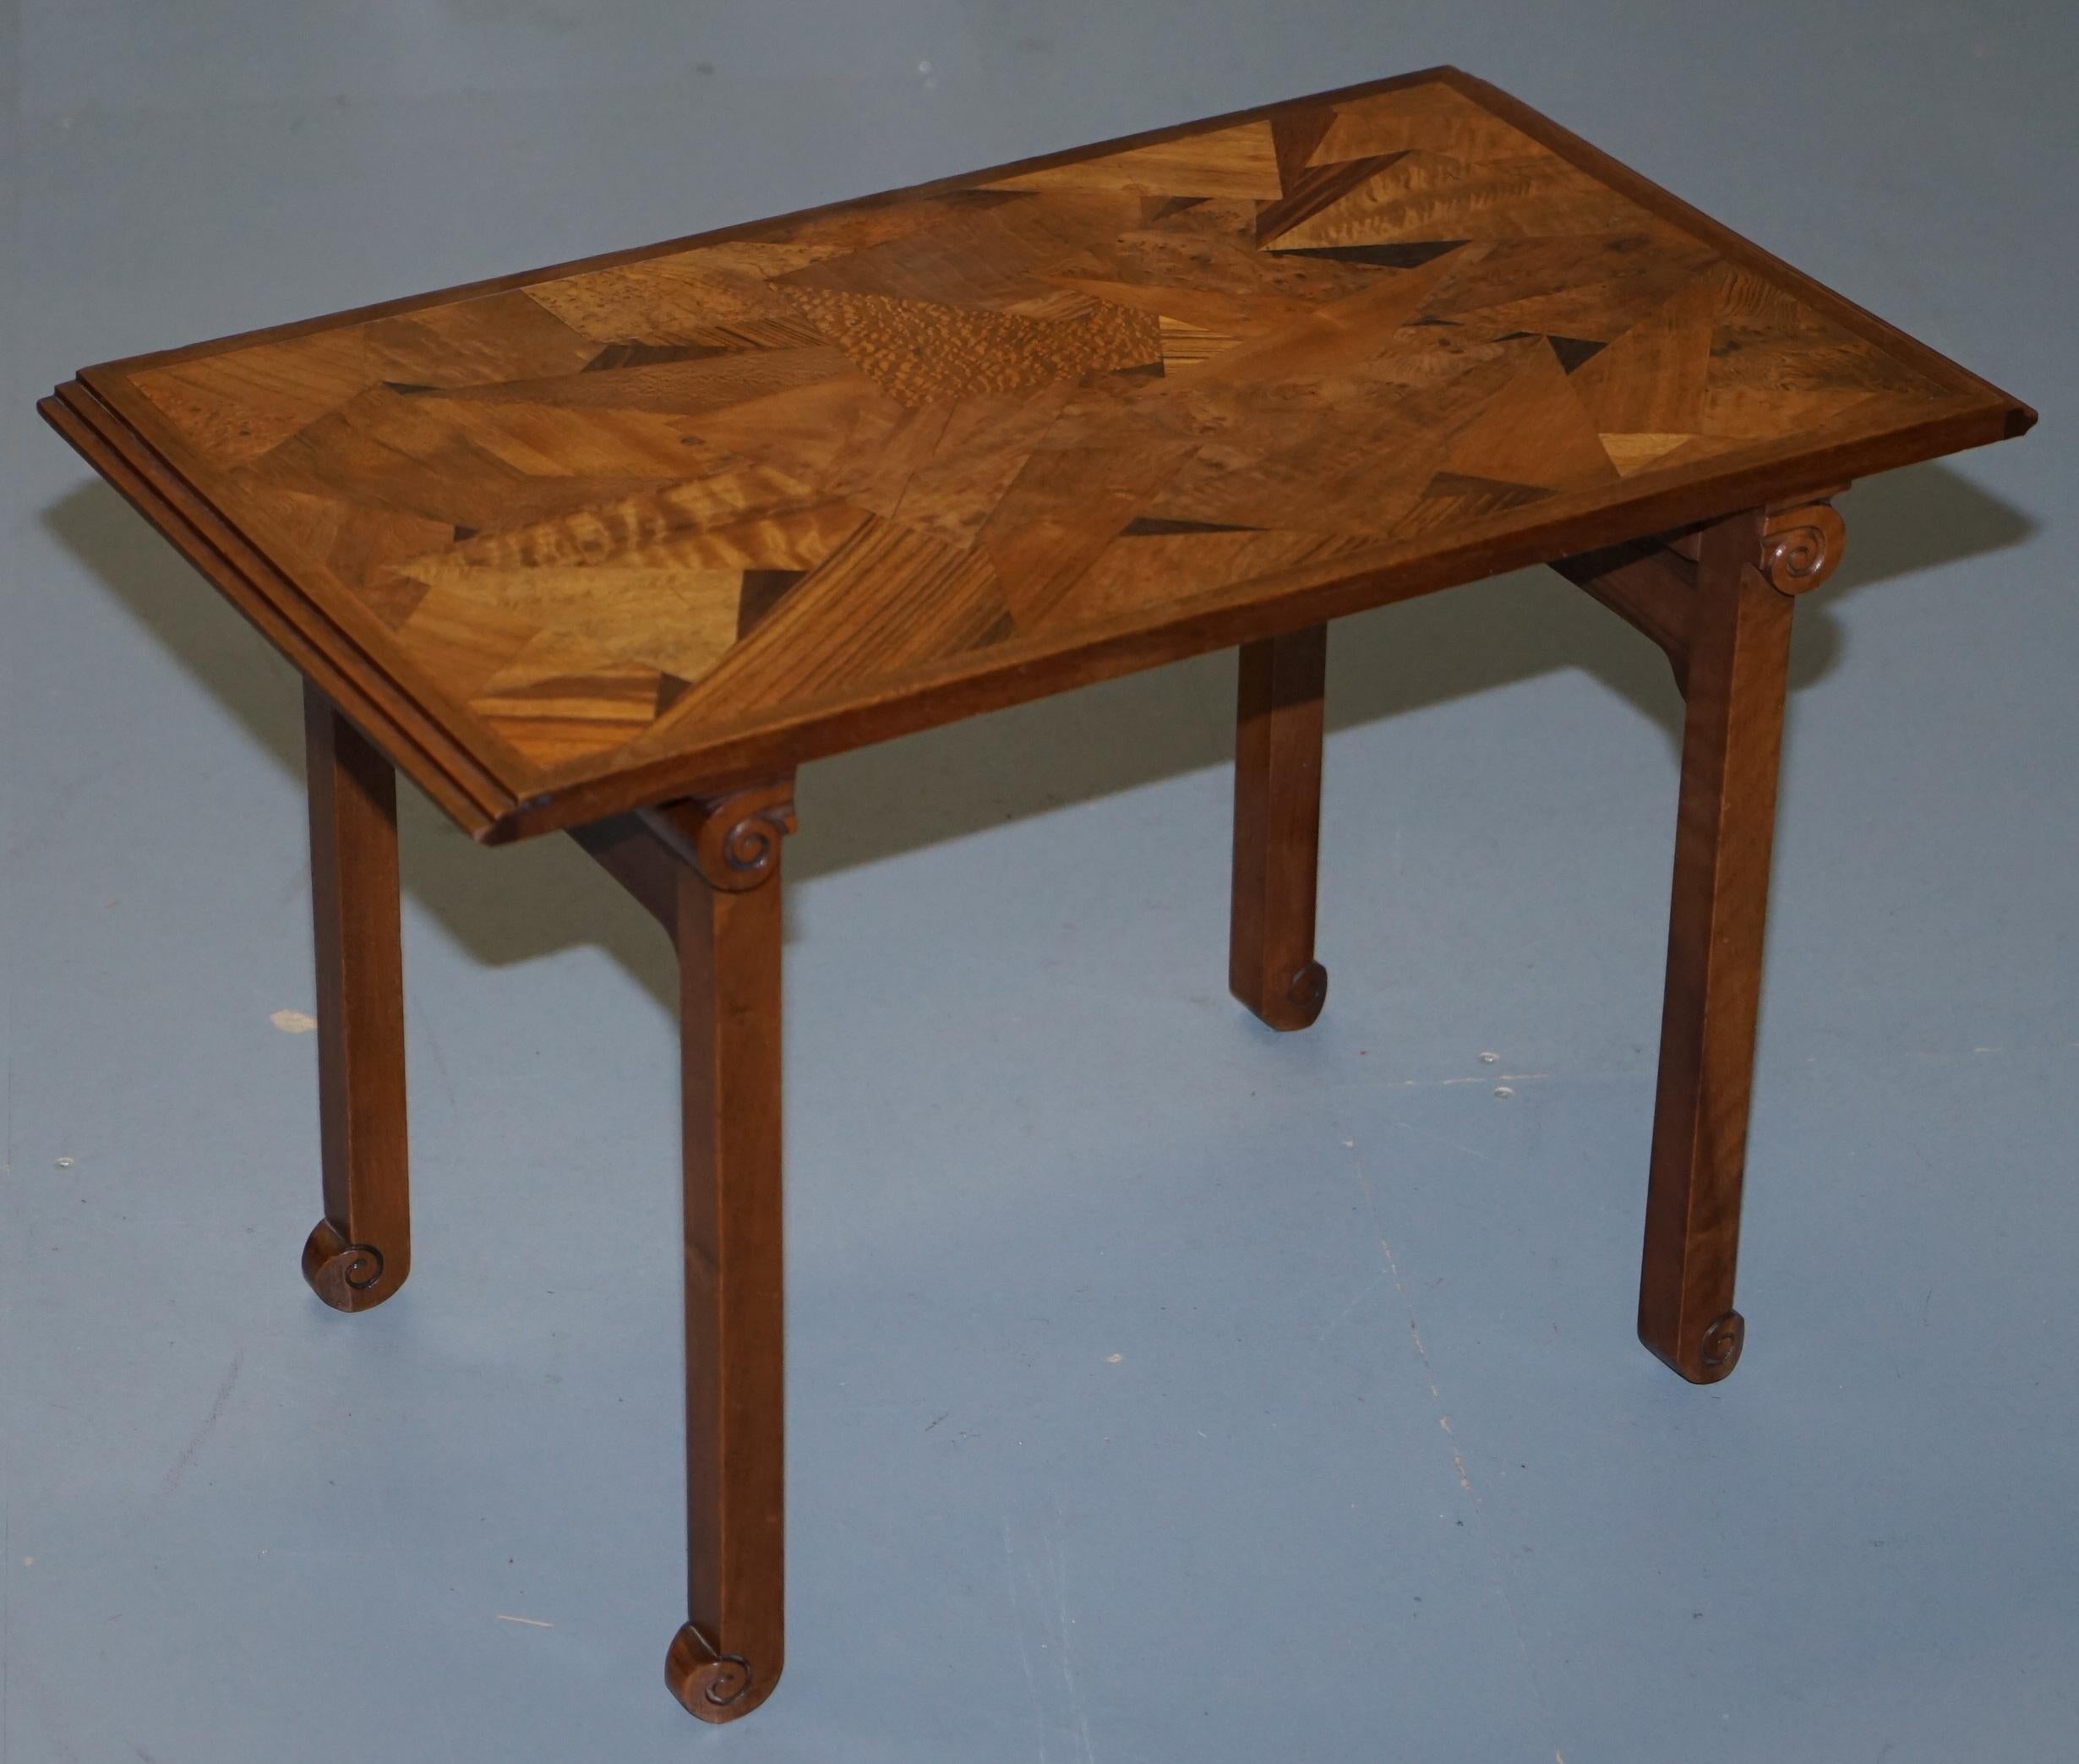 Satinwood Extremely Rare Nest of Emile Galle circa 1900 Specimen Wood Tables Art Nouveau For Sale